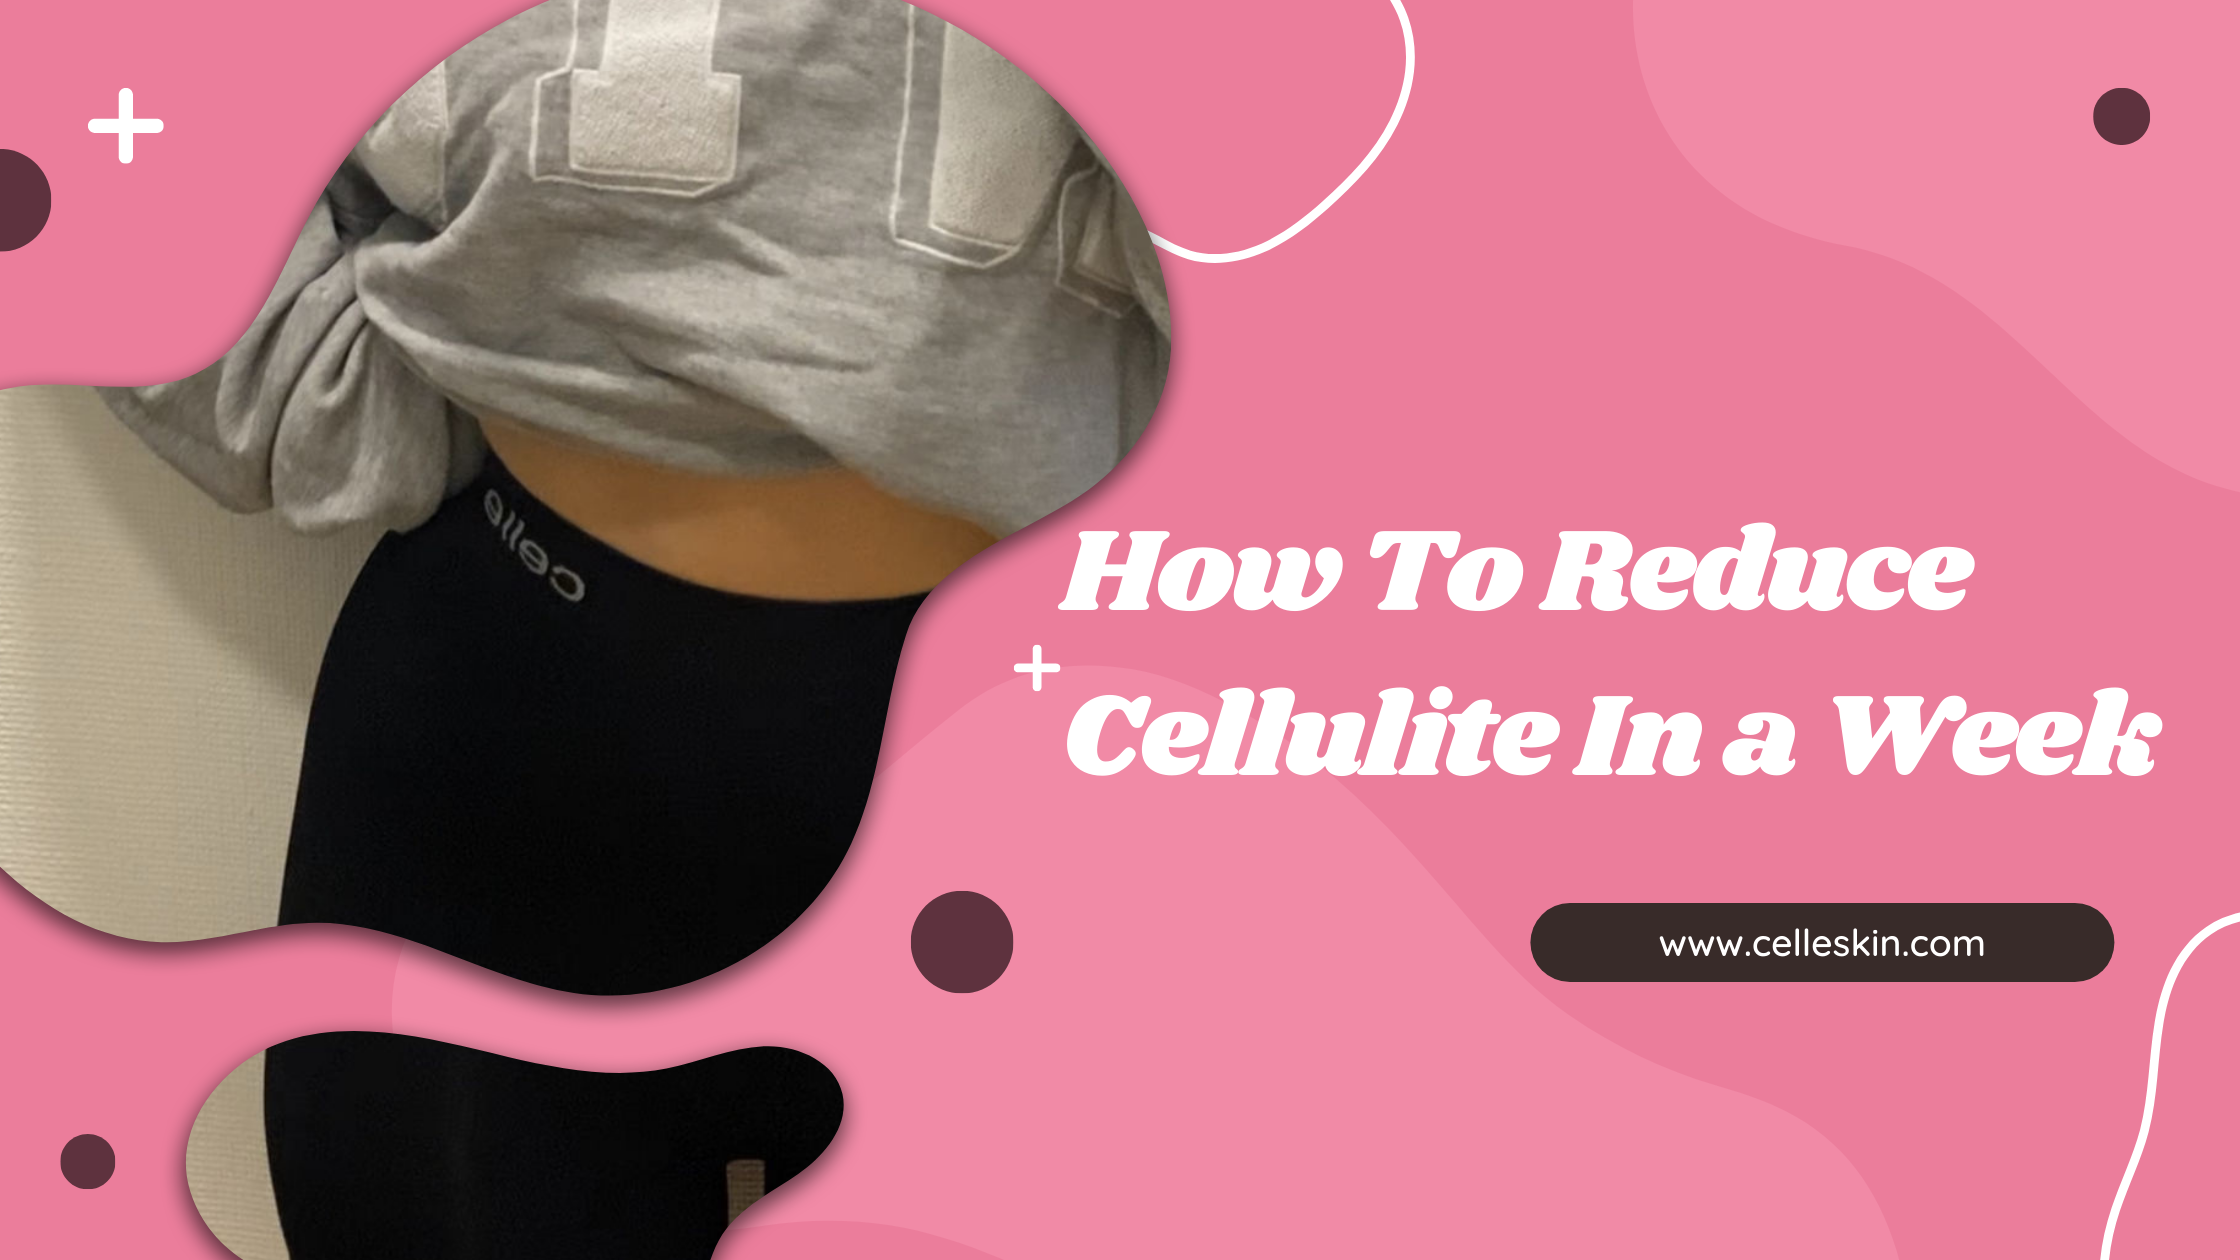 Cellulite reduction tips for summer